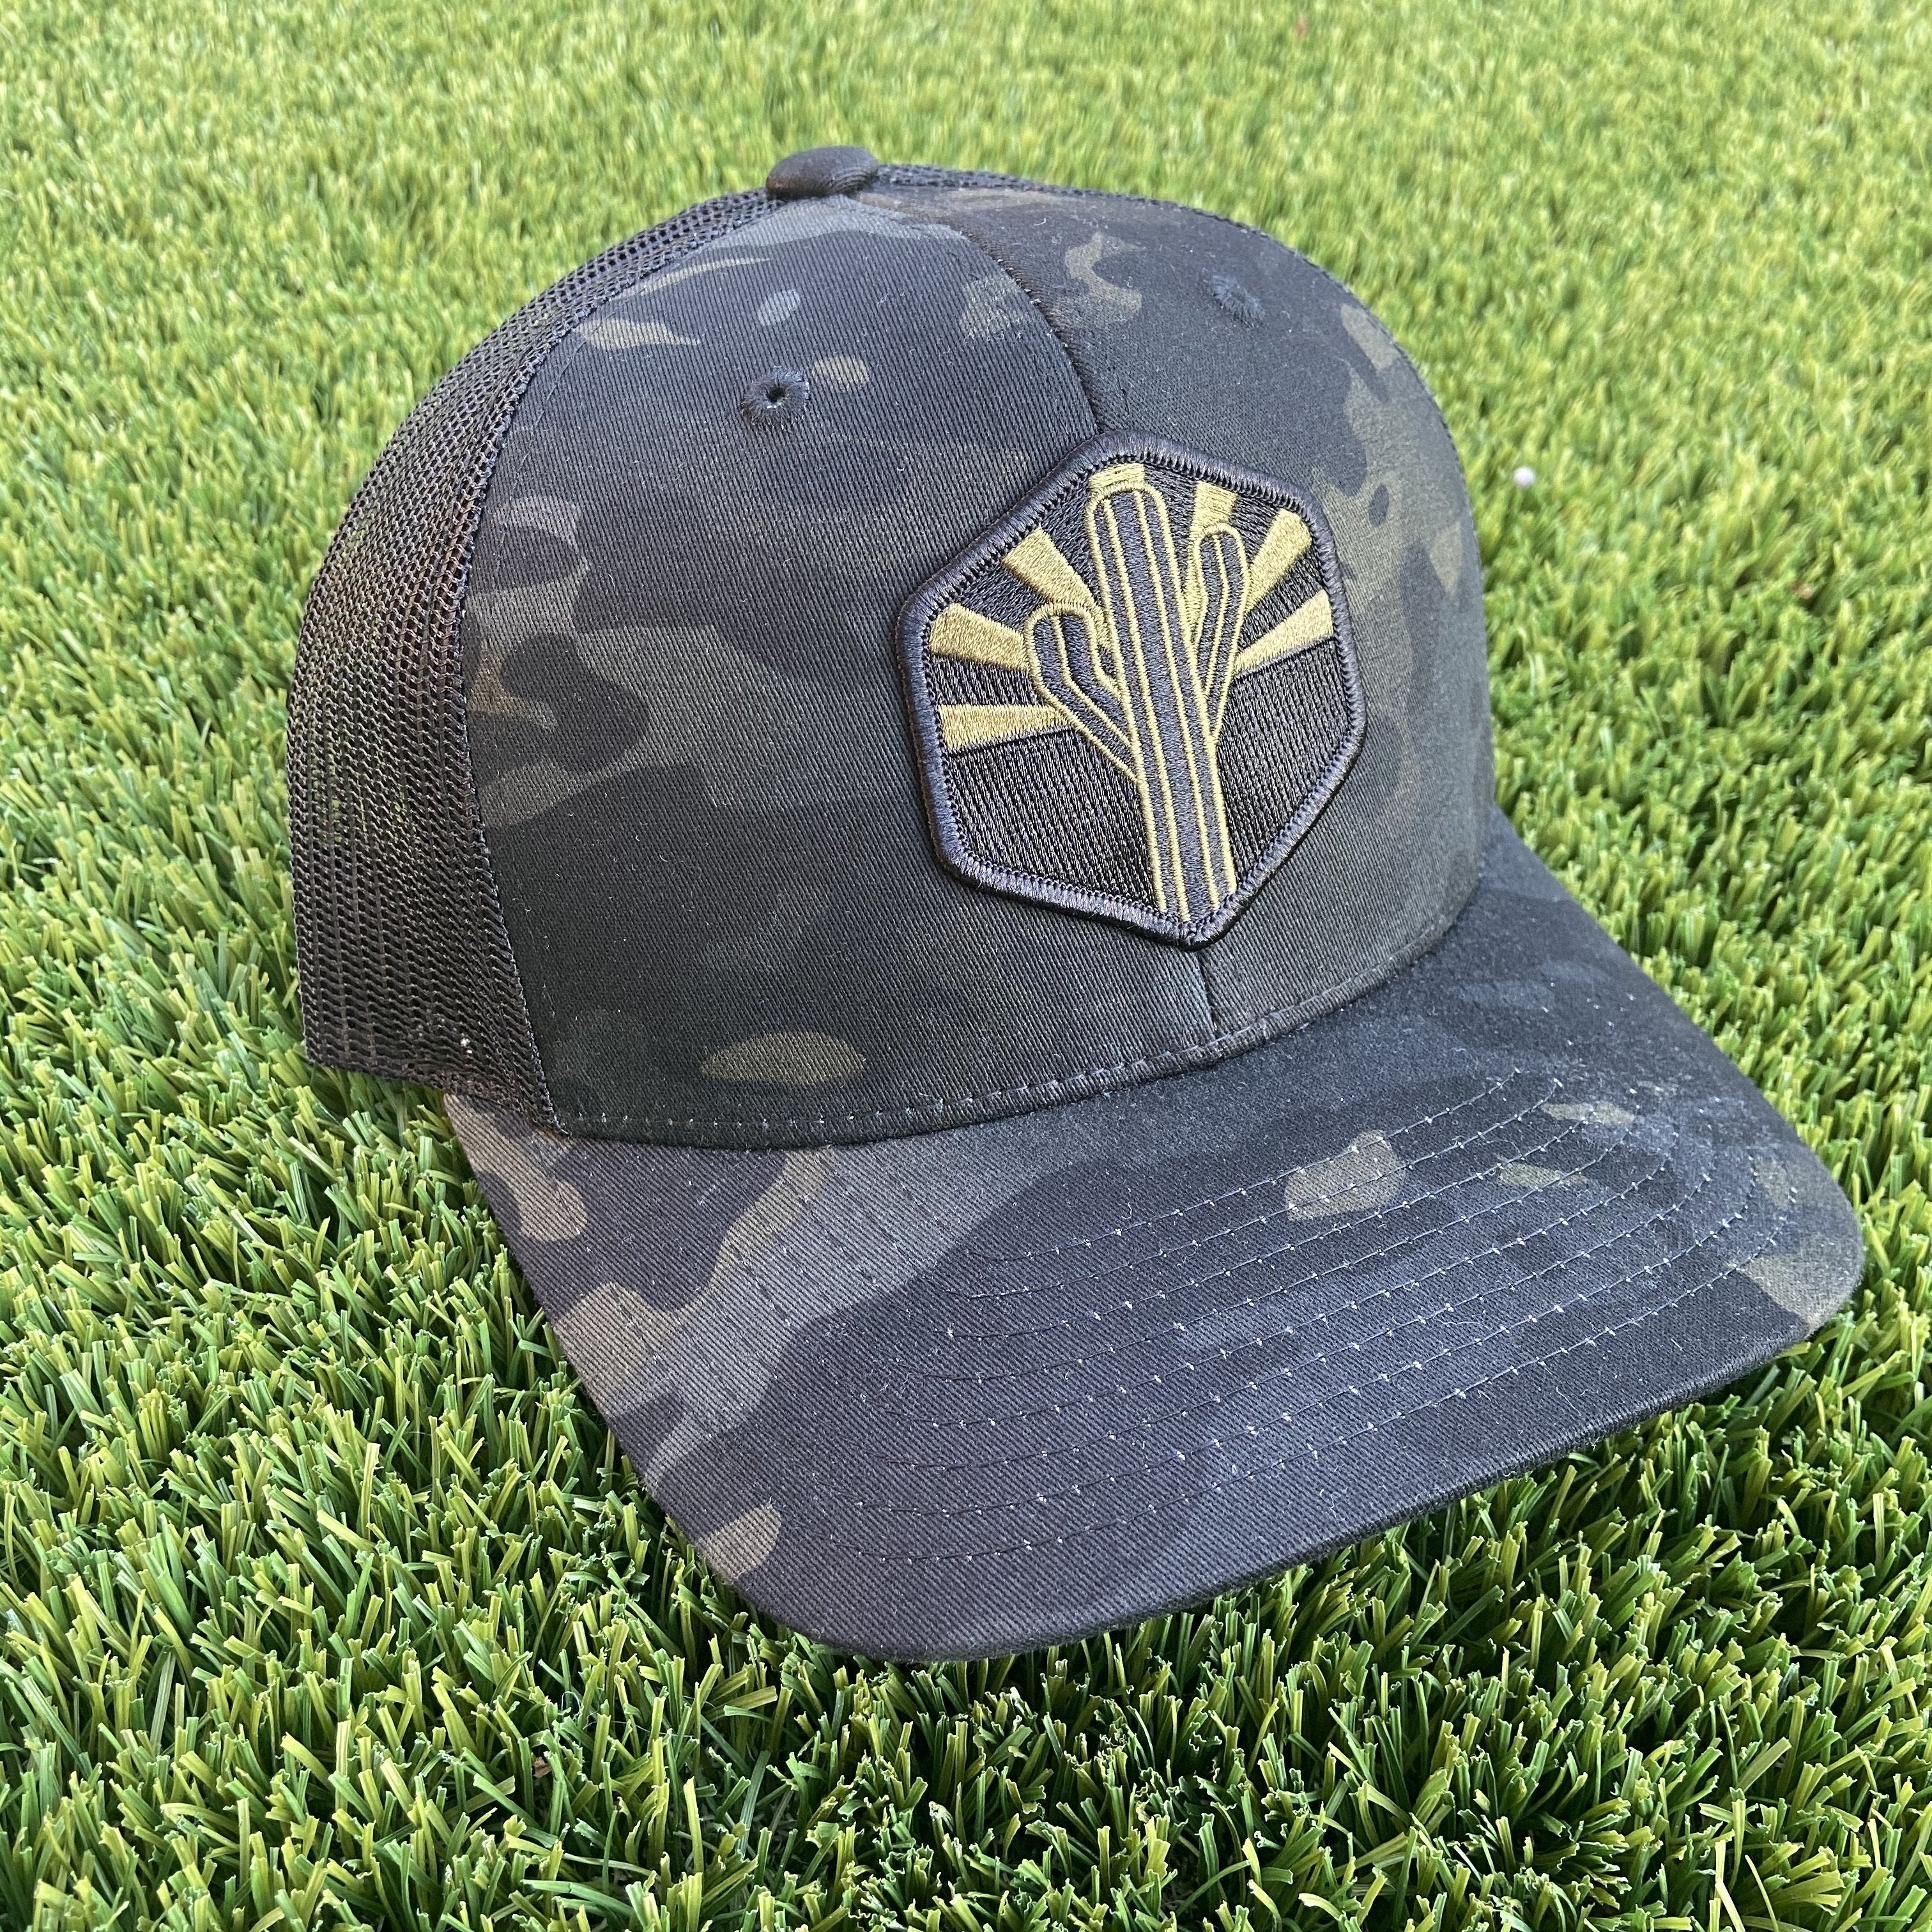 The Military Sentinel Curved Trucker - Camo on Black